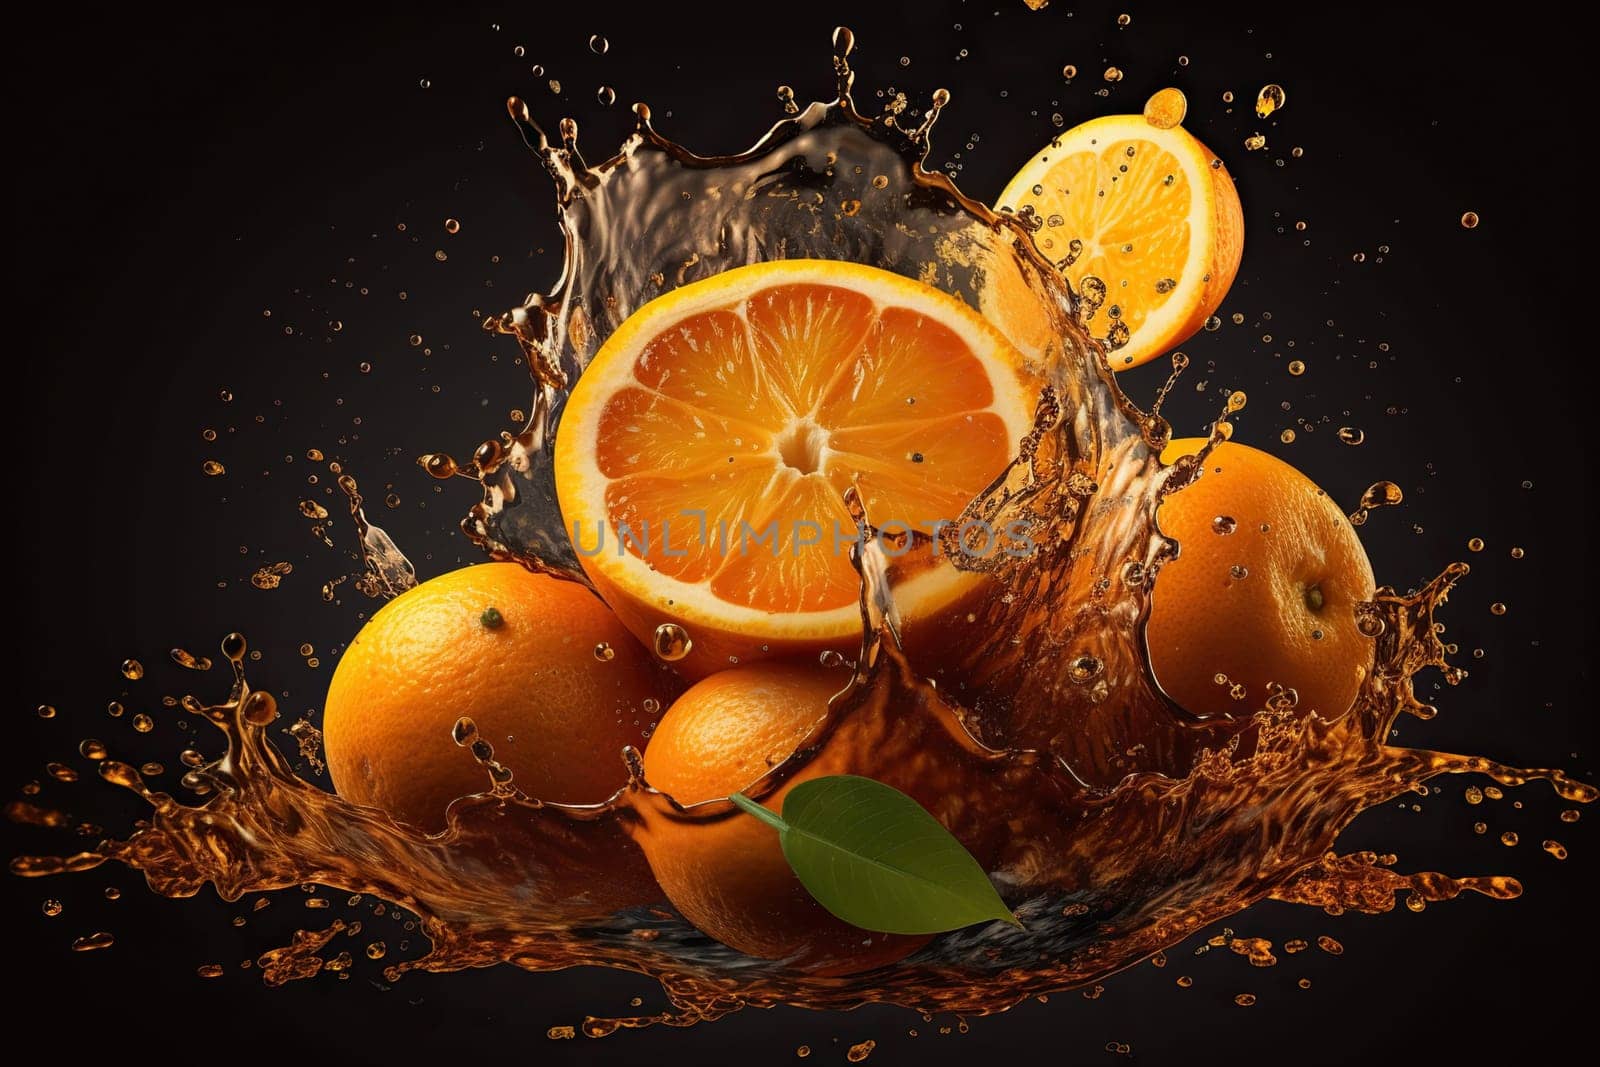 Fresh Oranges In Splashes And Drops Of Juice In Flight Stand Out Against A Dark Background